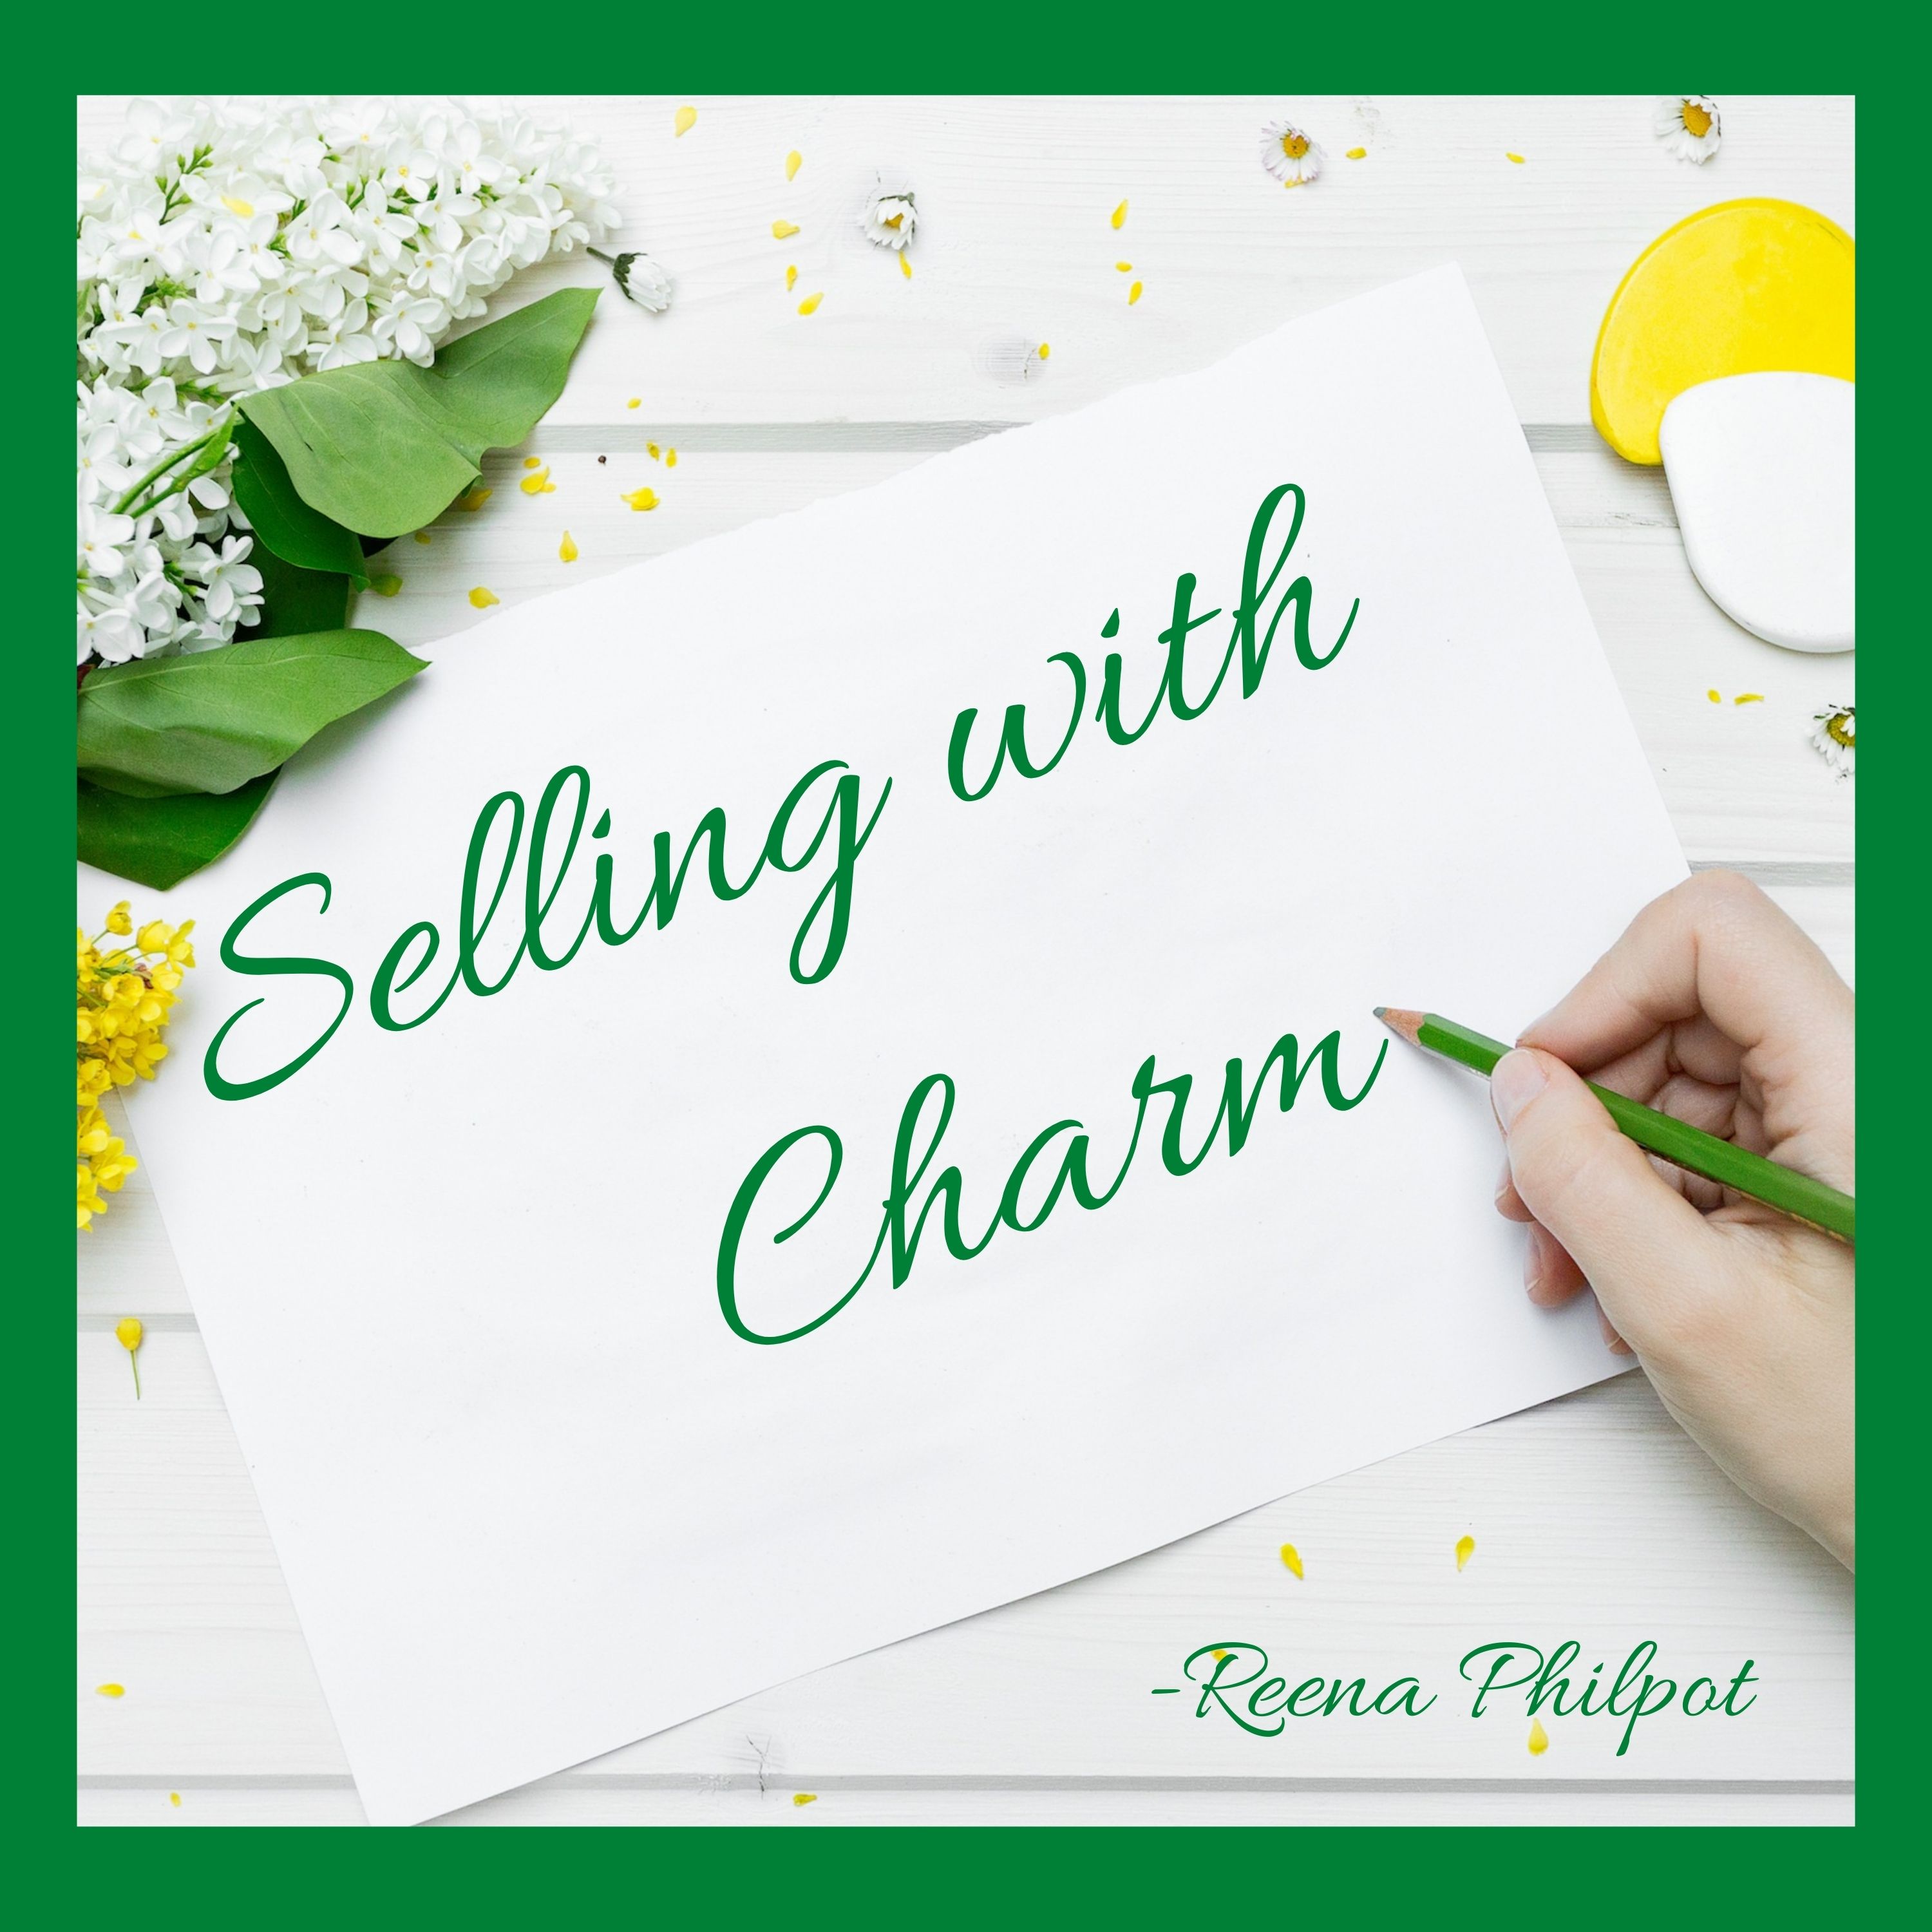 Artwork for Selling with Charm